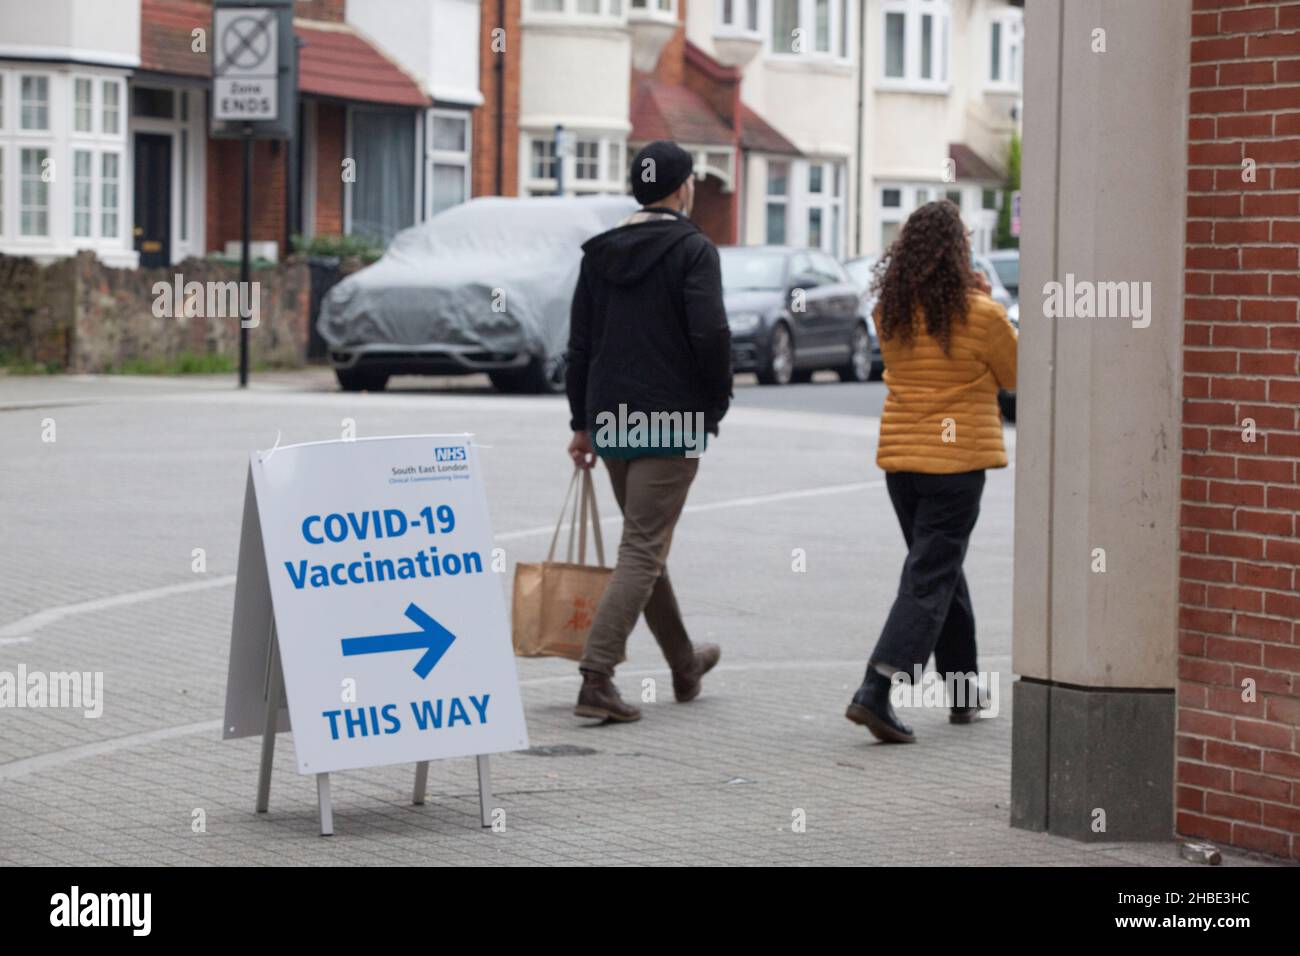 London, UK, 19 December 2021: A sign directs people to a pop-up vaccination centre at Lambeth Civic Centre in Brixton. Perhaps unaware that it is open on Sunday there were no people queuing although queues had been long earlier in the week. Anna Watson/Alamy Live News Stock Photo